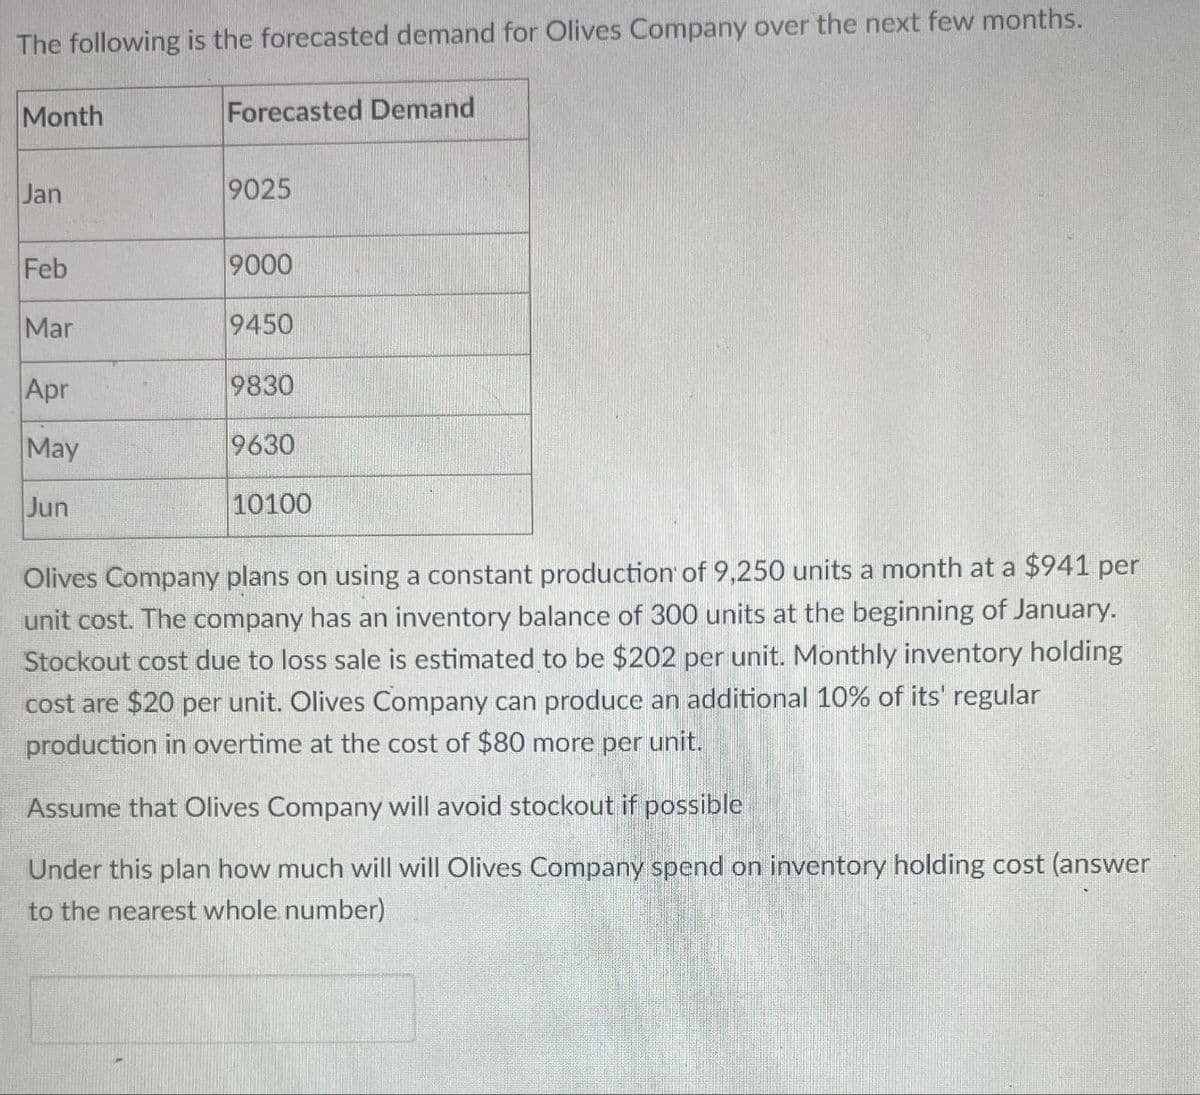 The following is the forecasted demand for Olives Company over the next few months.
Month
Forecasted Demand
Jan
9025
Feb
9000
Mar
9450
Apr
9830
May
9630
10100
Jun
Olives Company plans on using a constant production of 9,250 units a month at a $941 per
unit cost. The company has an inventory balance of 300 units at the beginning of January.
Stockout cost due to loss sale is estimated to be $202 per unit. Monthly inventory holding
cost are $20 per unit. Olives Company can produce an additional 10% of its' regular
production in overtime at the cost of $80 more per unit.
Assume that Olives Company will avoid stockout if possible
Under this plan how much will will Olives Company spend on inventory holding cost (answer
to the nearest whole number)